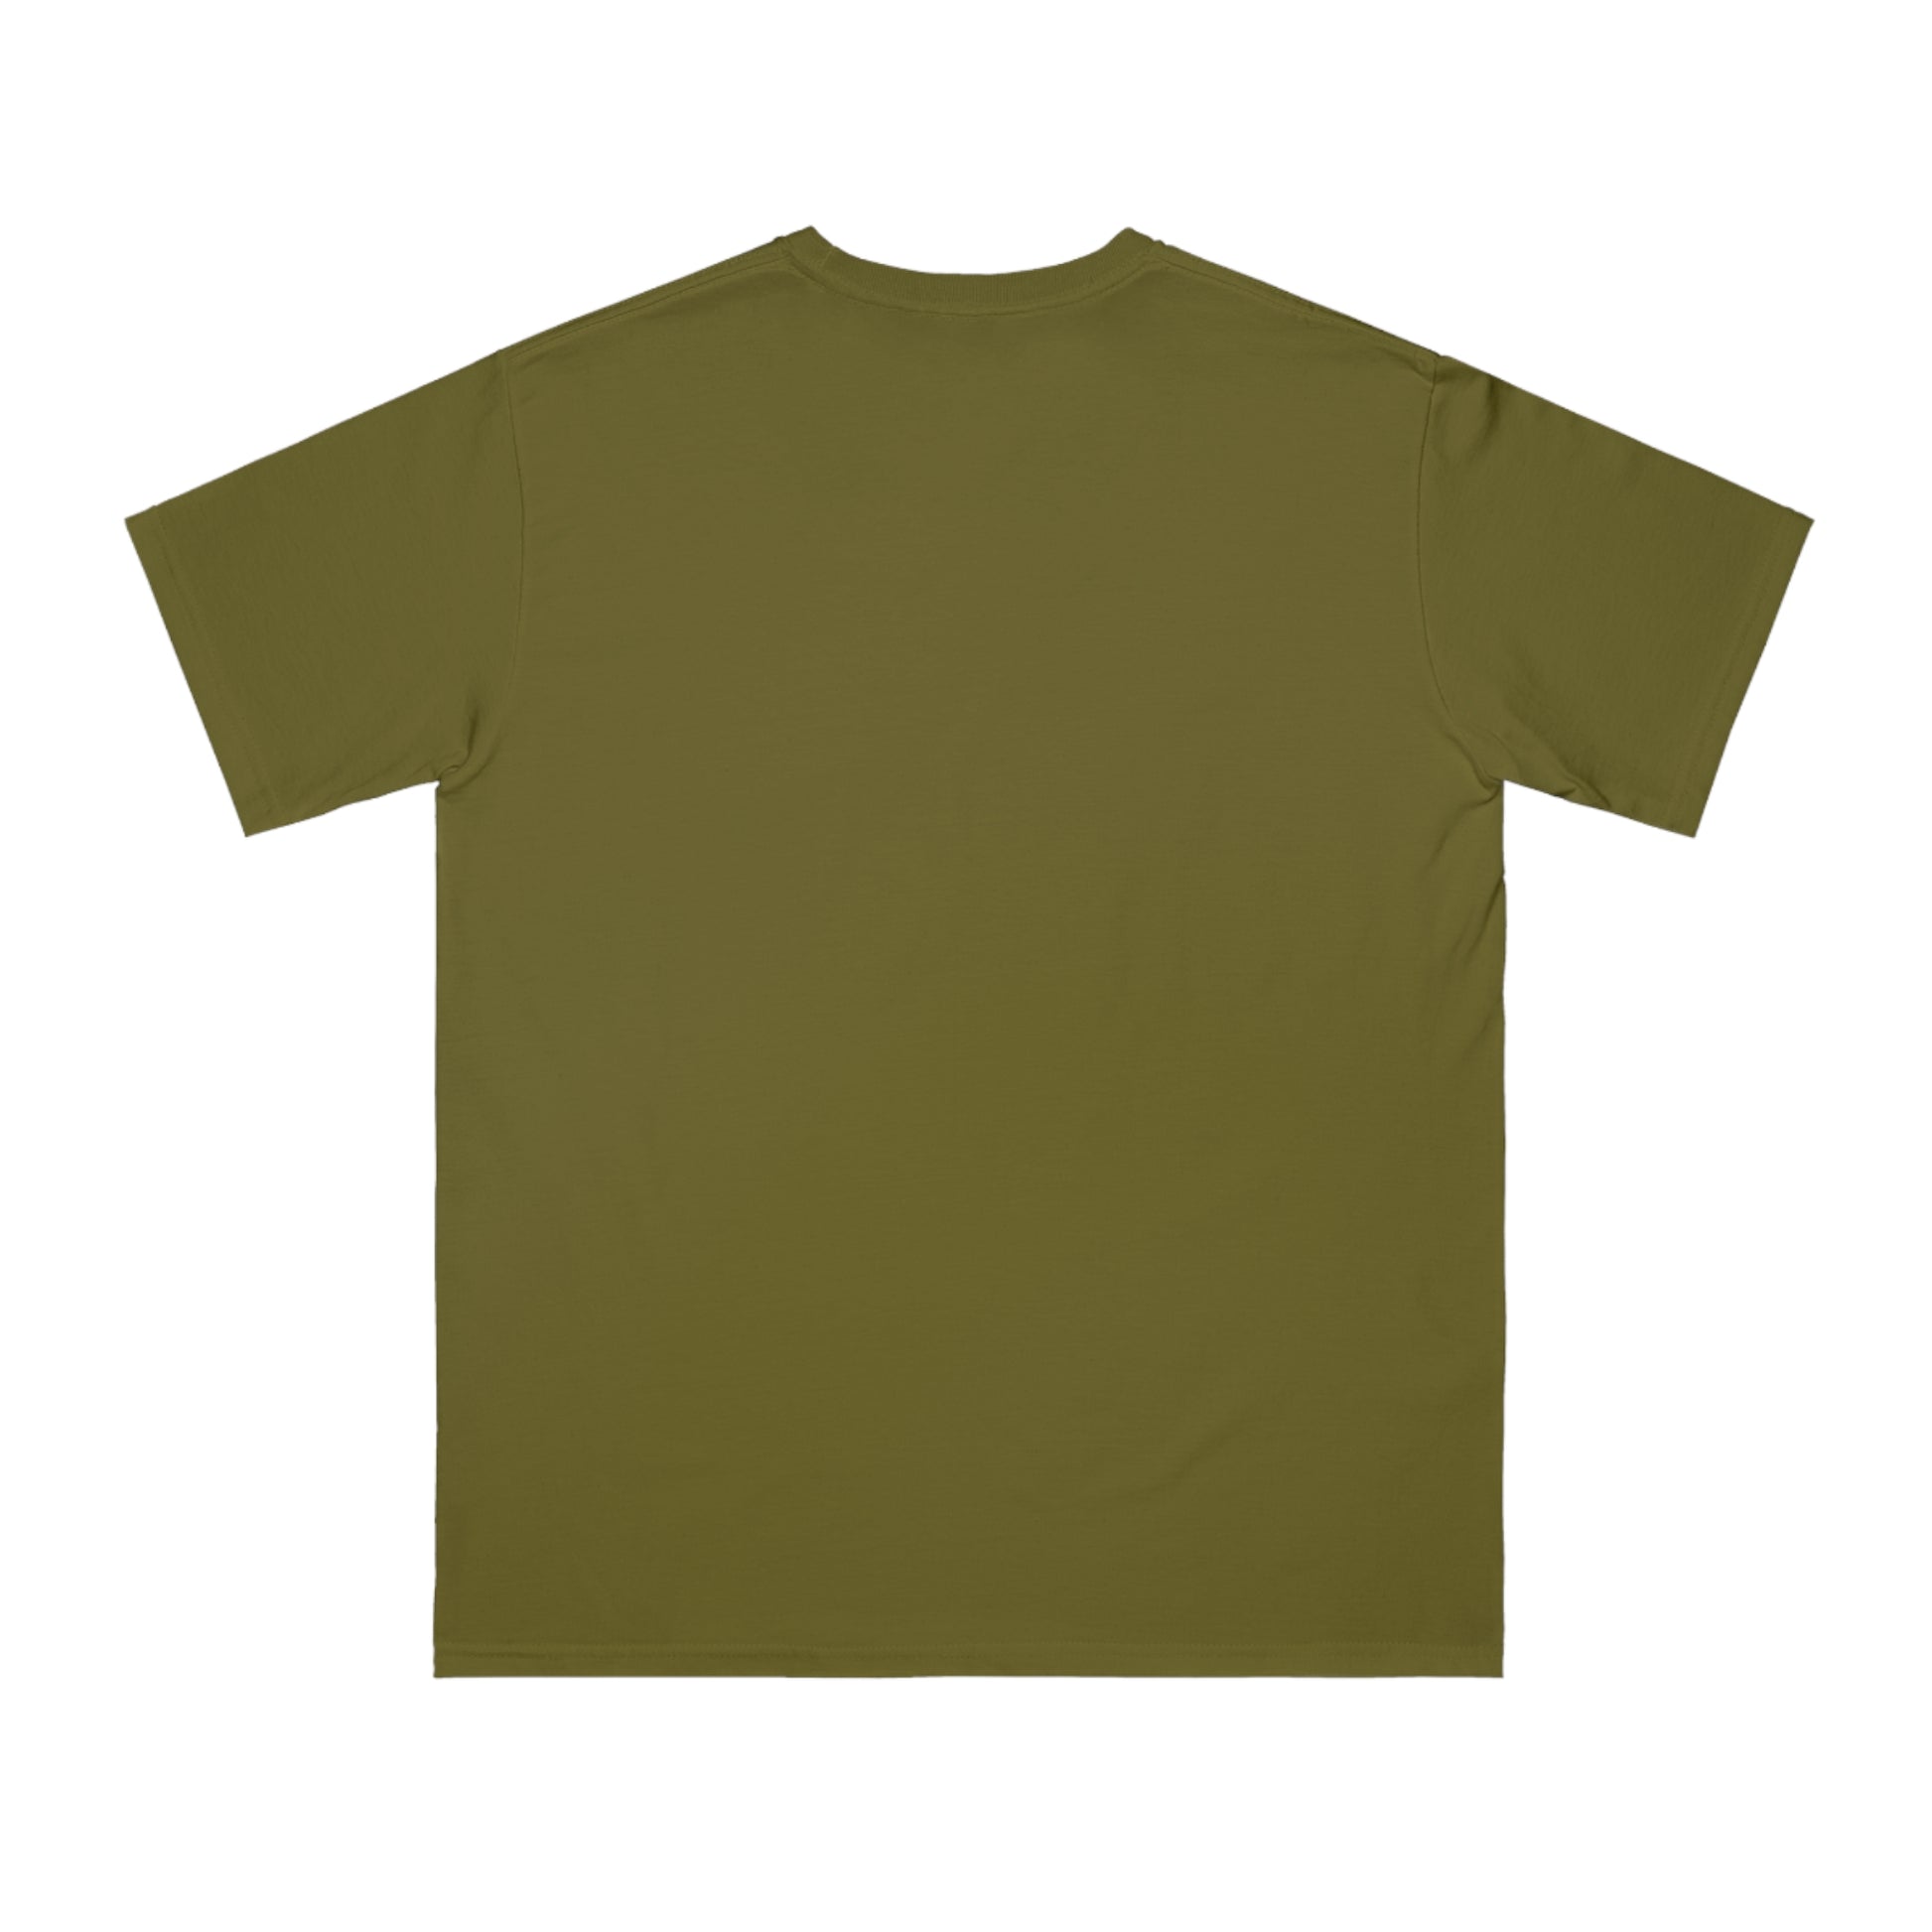 a green t - shirt with a white background